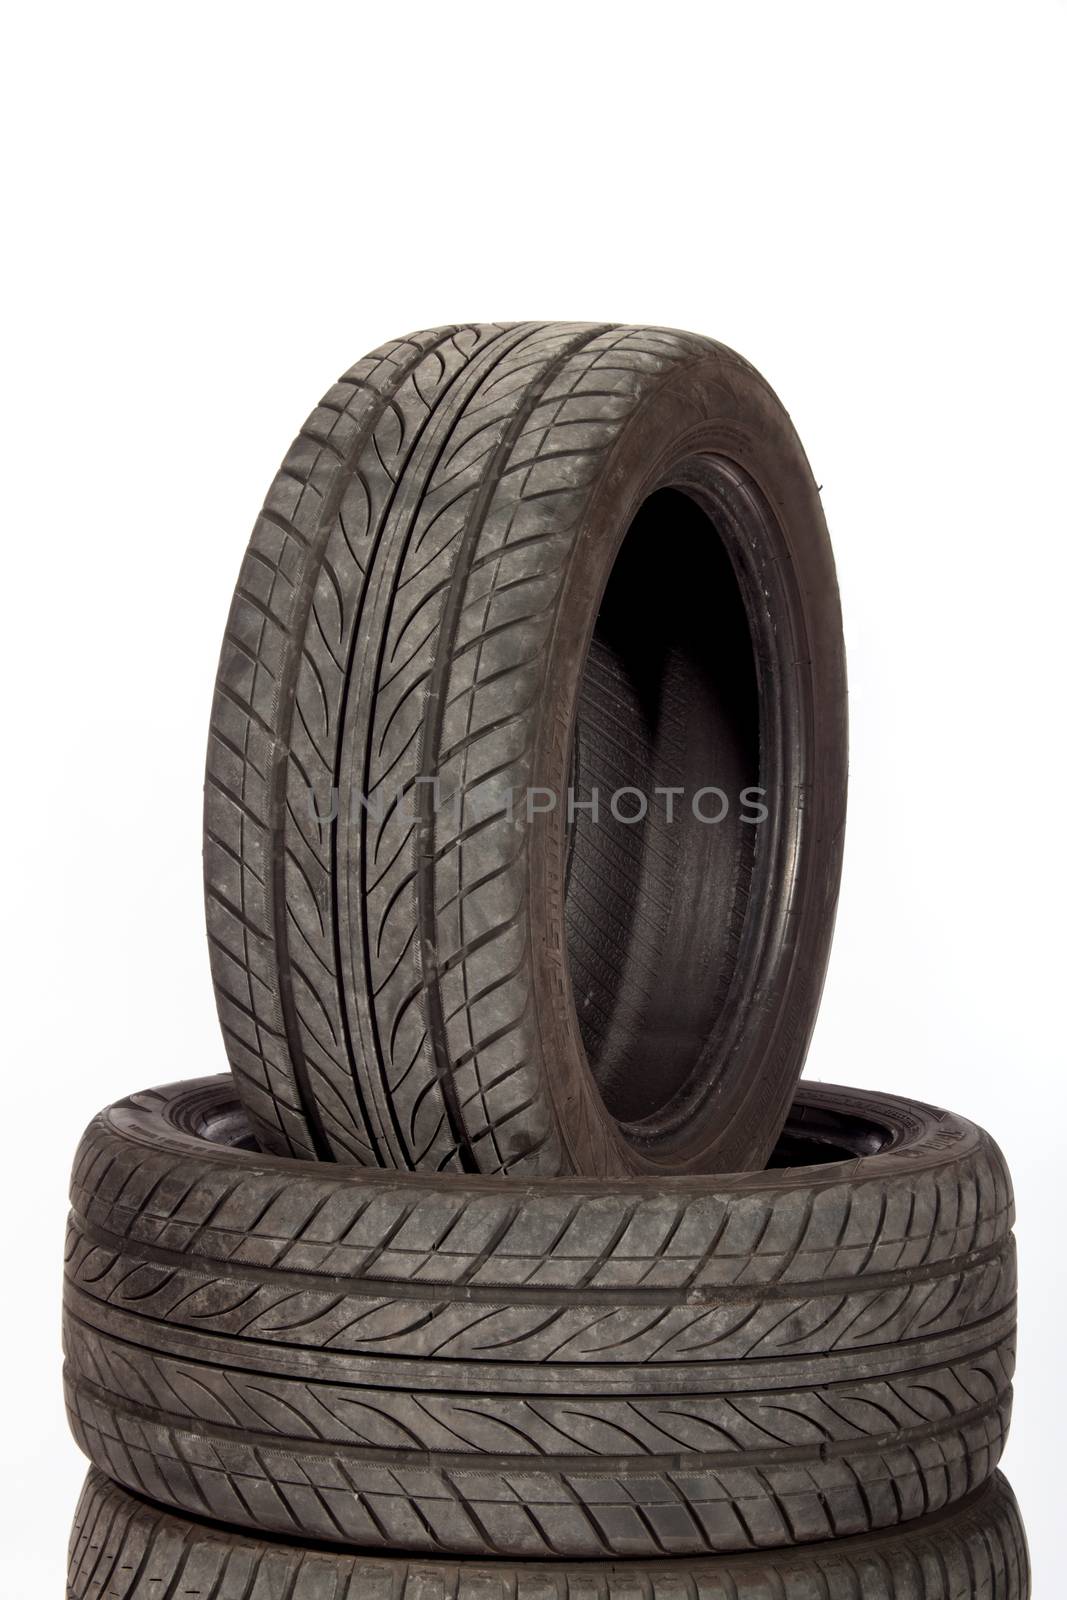 Used, dirty tires isolated on white